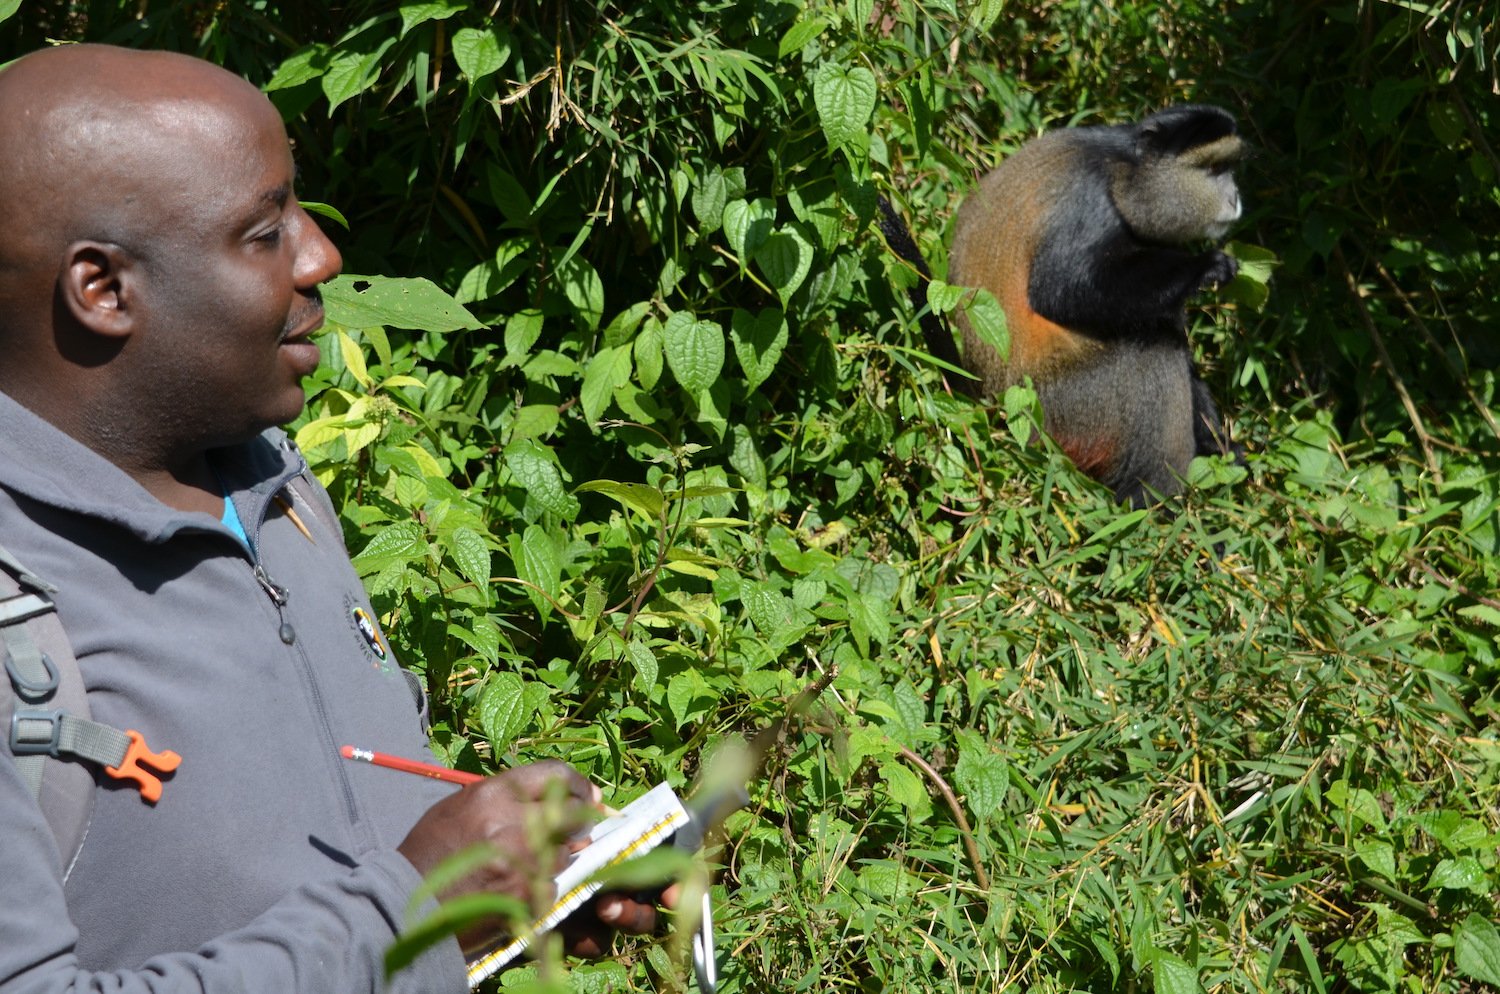 Deo collecting data on golden monkeys